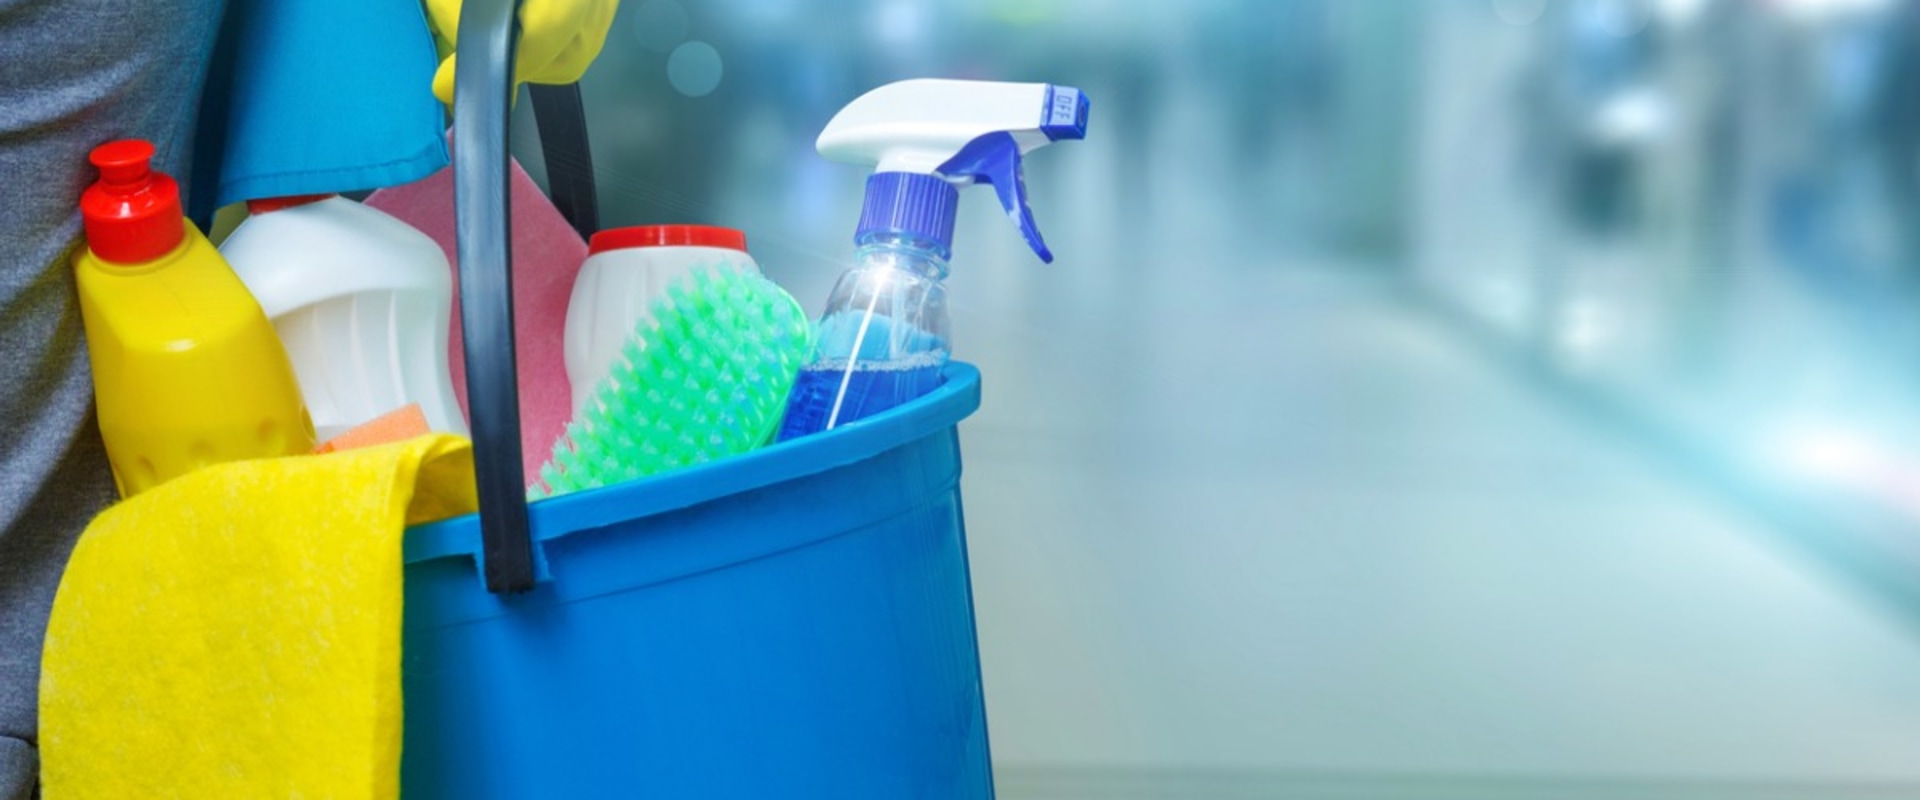 10 Essential Cleaning Chemicals for Commercial Kitchens